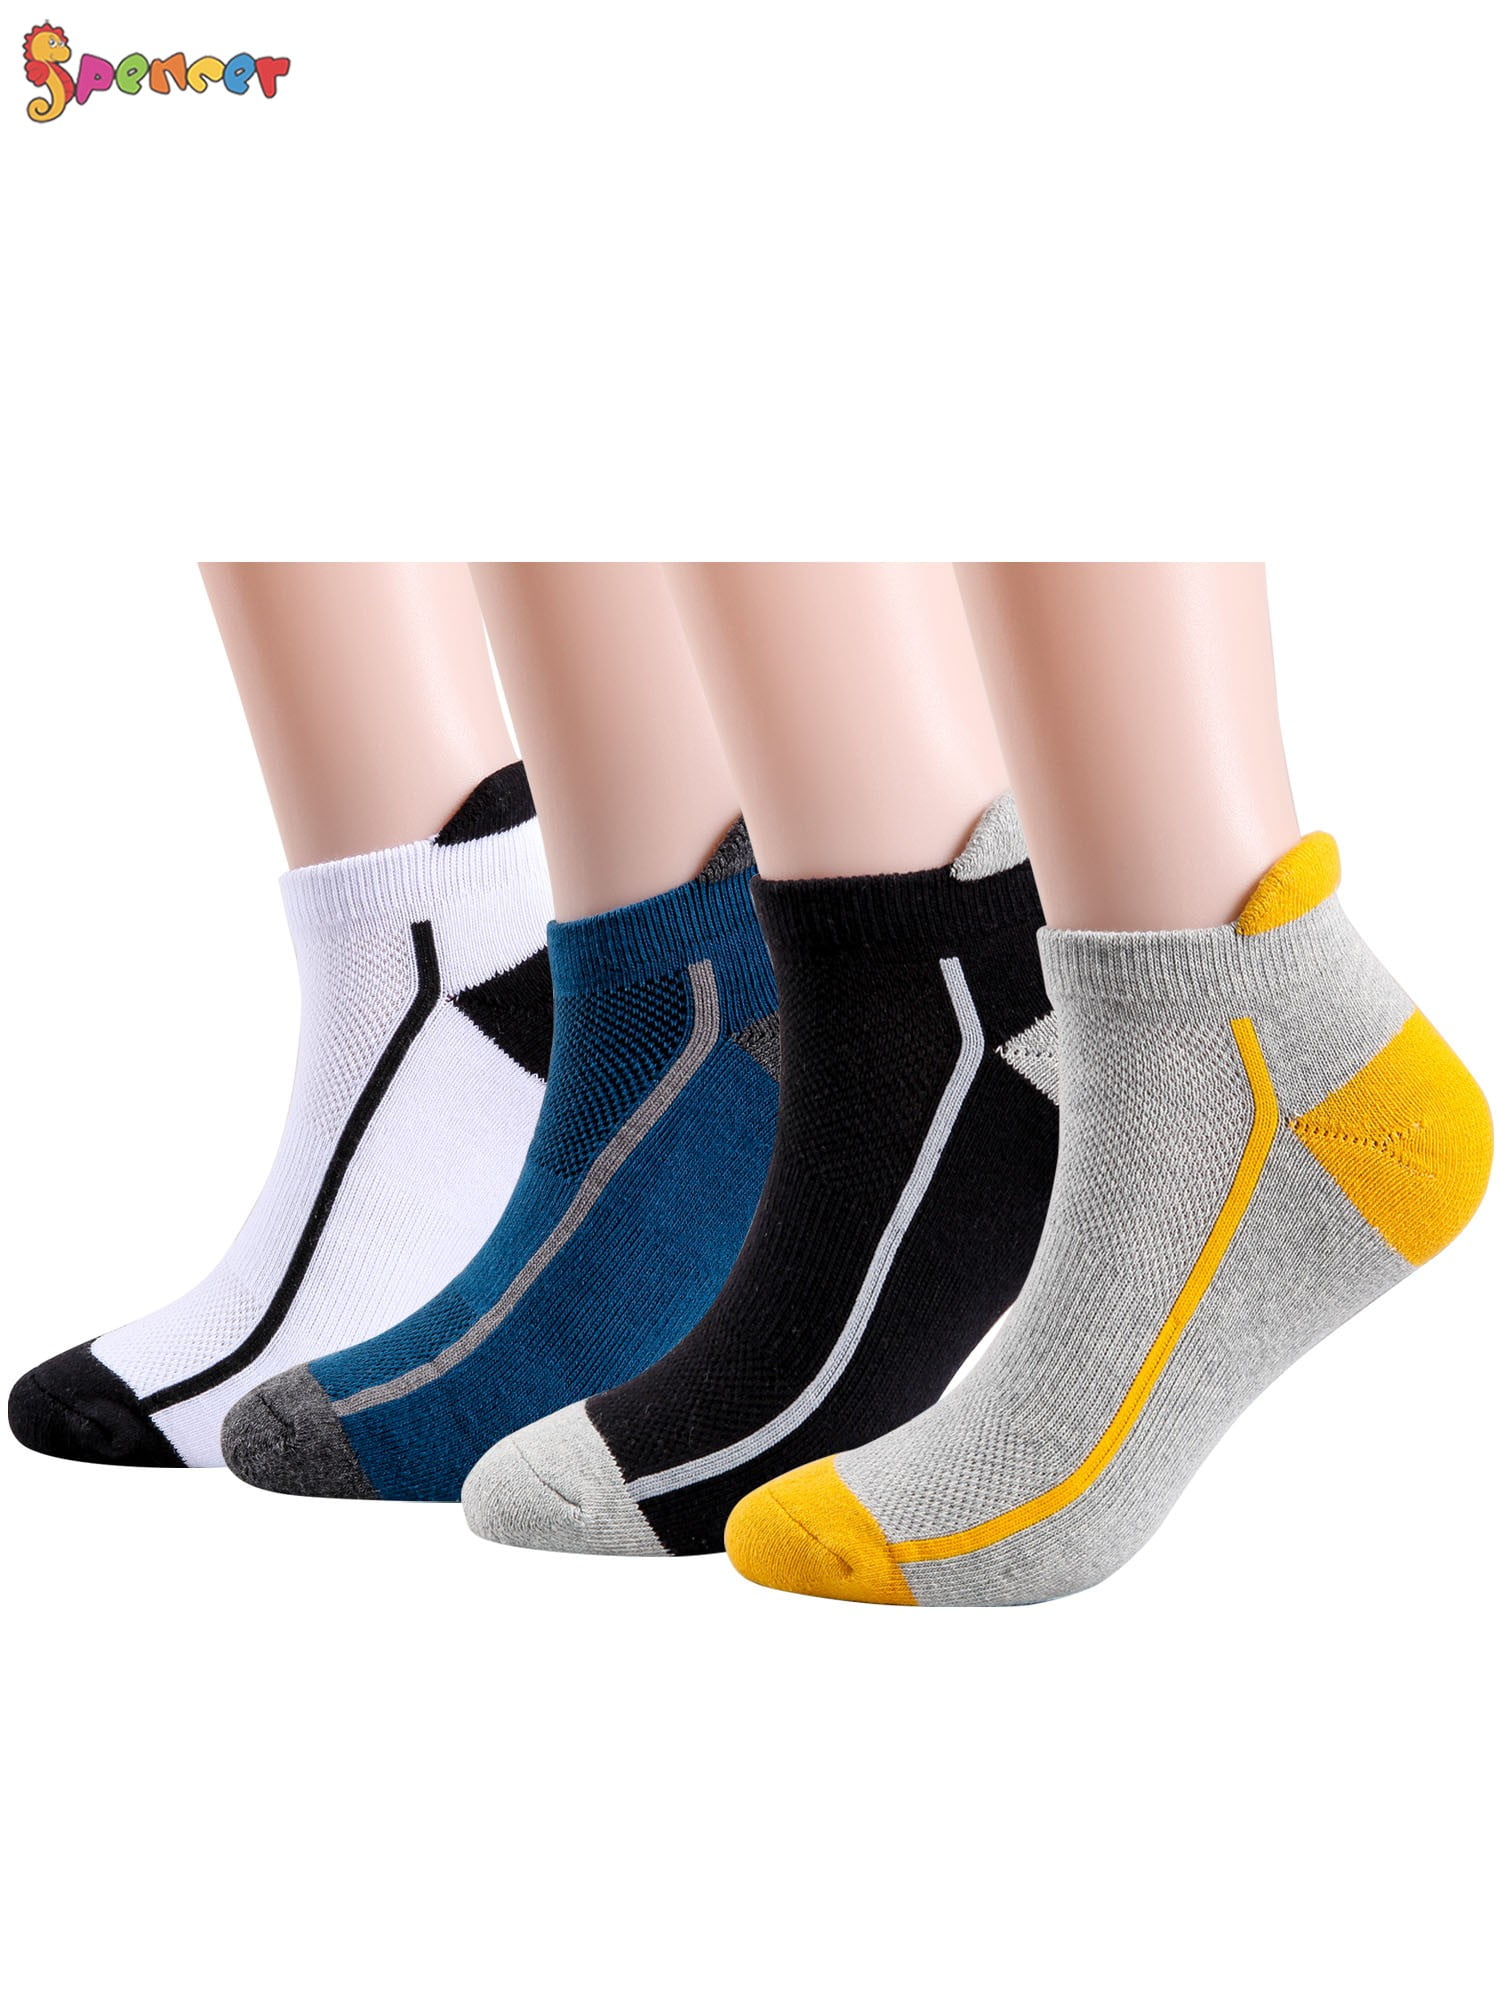 Cooplus Mens Cotton Athletic Ankle Socks Performance Cushioned Breathable Low Cut Tab Sock with Arch Support 6 Pairs 